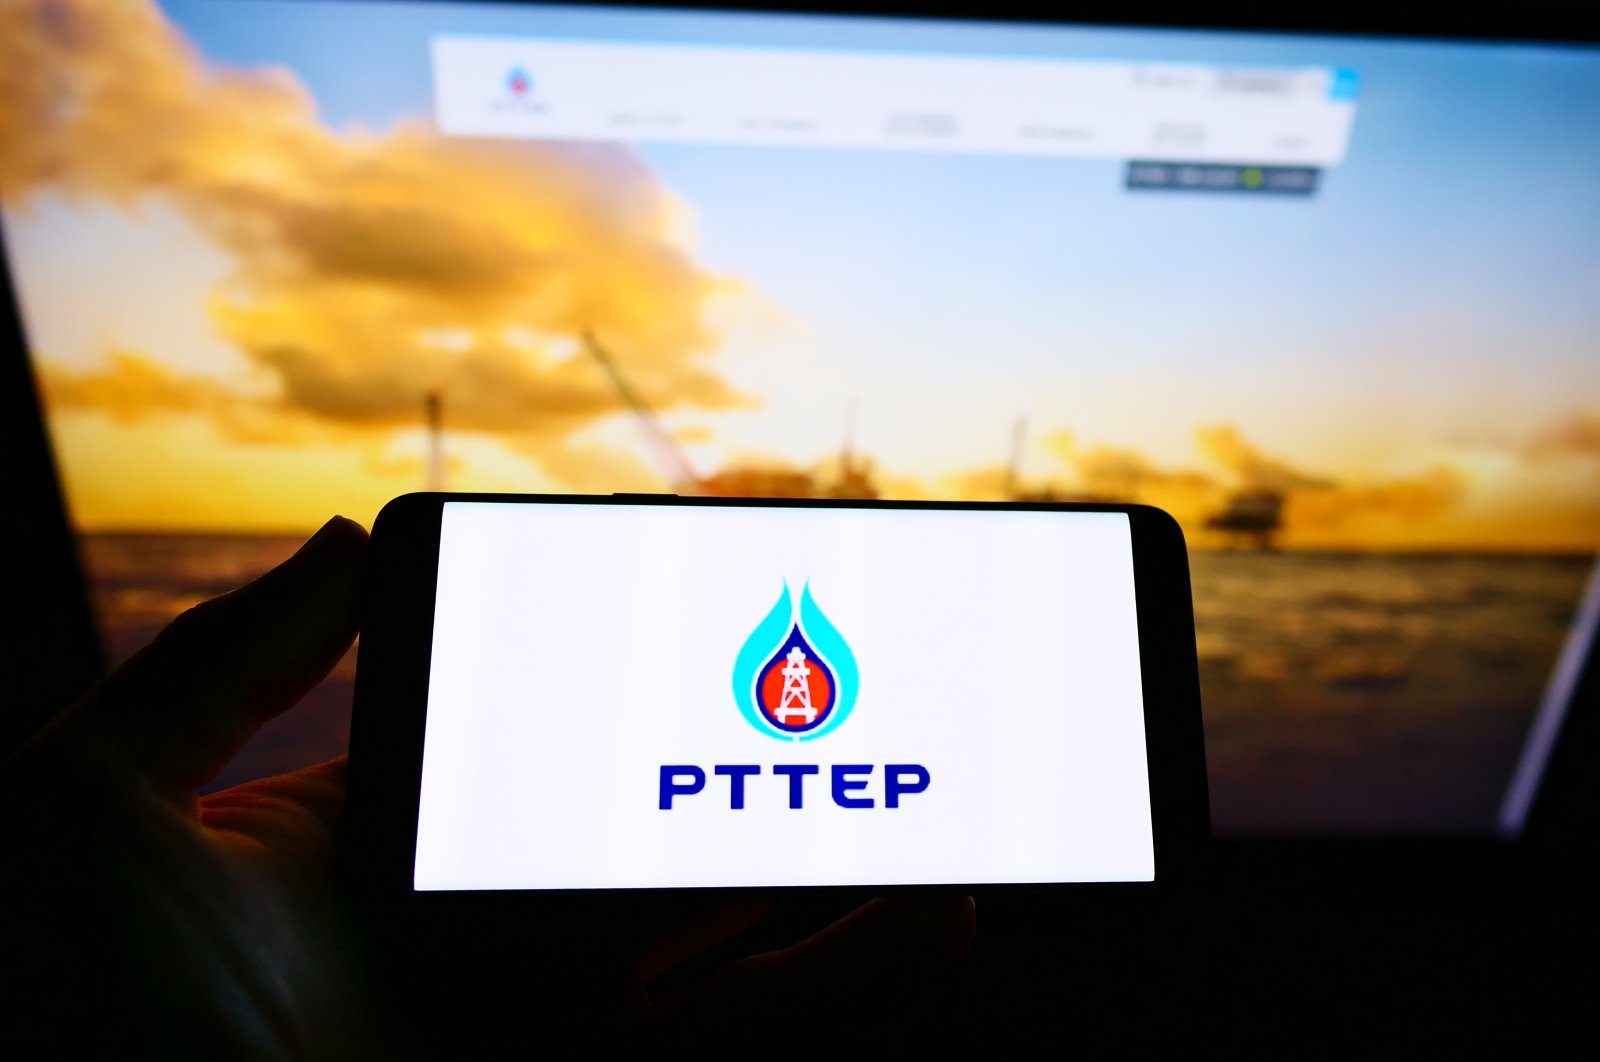 A person holds a smartphone with the logo of Thai company PTT Exploration and Production (PTTEP) on the screen in front of the website, Stuttgart, Germany, May 3, 2021. (Shutterstock Photo)